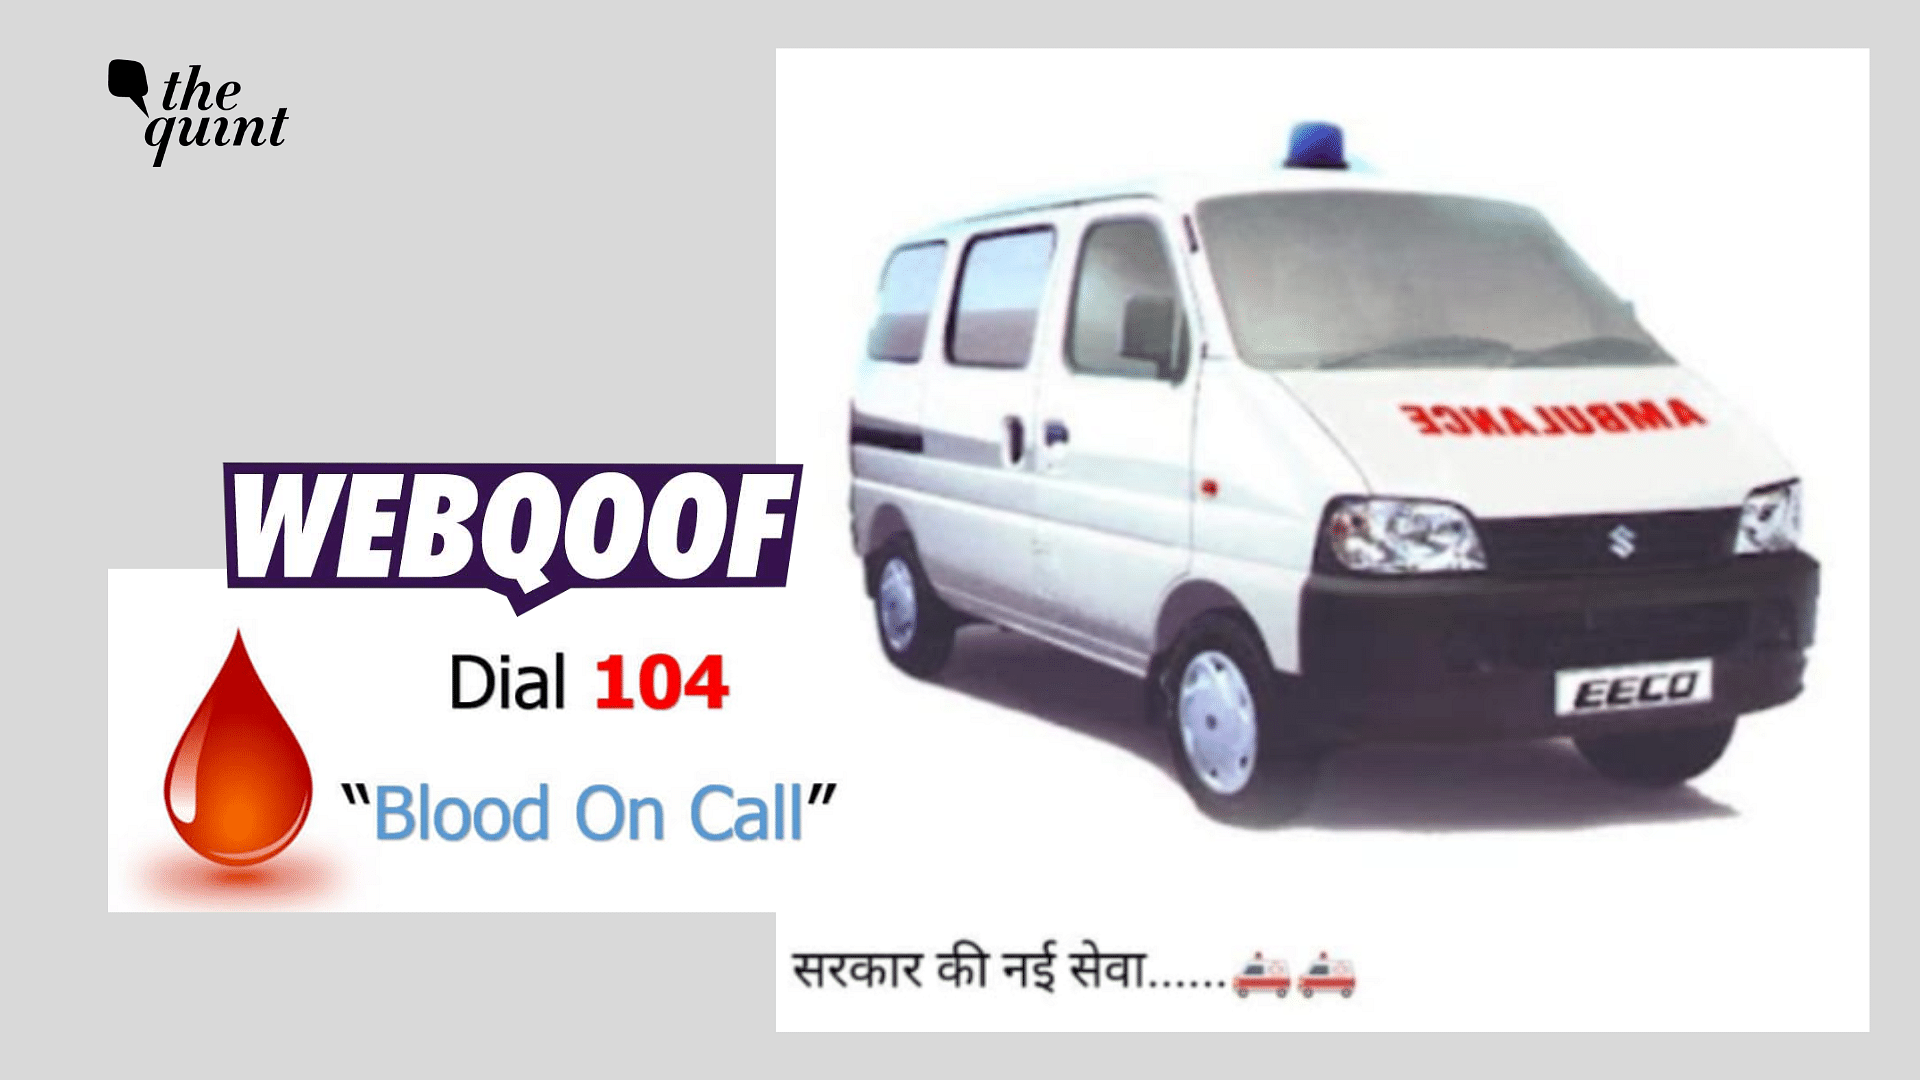 <div class="paragraphs"><p>Fact-check: Government has not launched any such service for 'blood on call' with 104 helpline.</p></div>